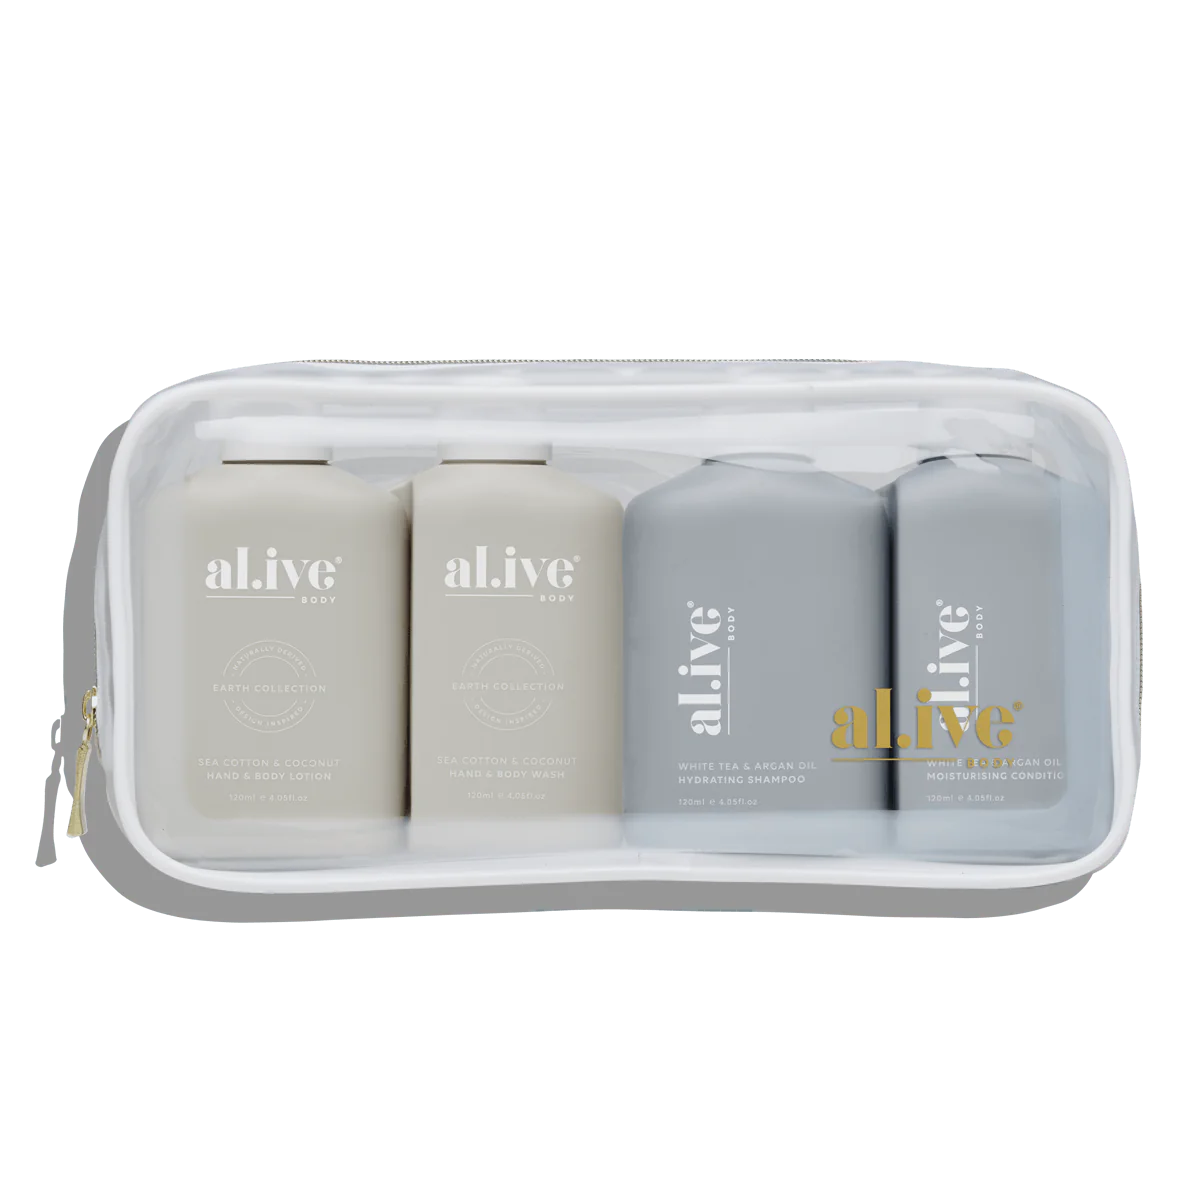 Hair and Body Travel Pack' Al.ive Body